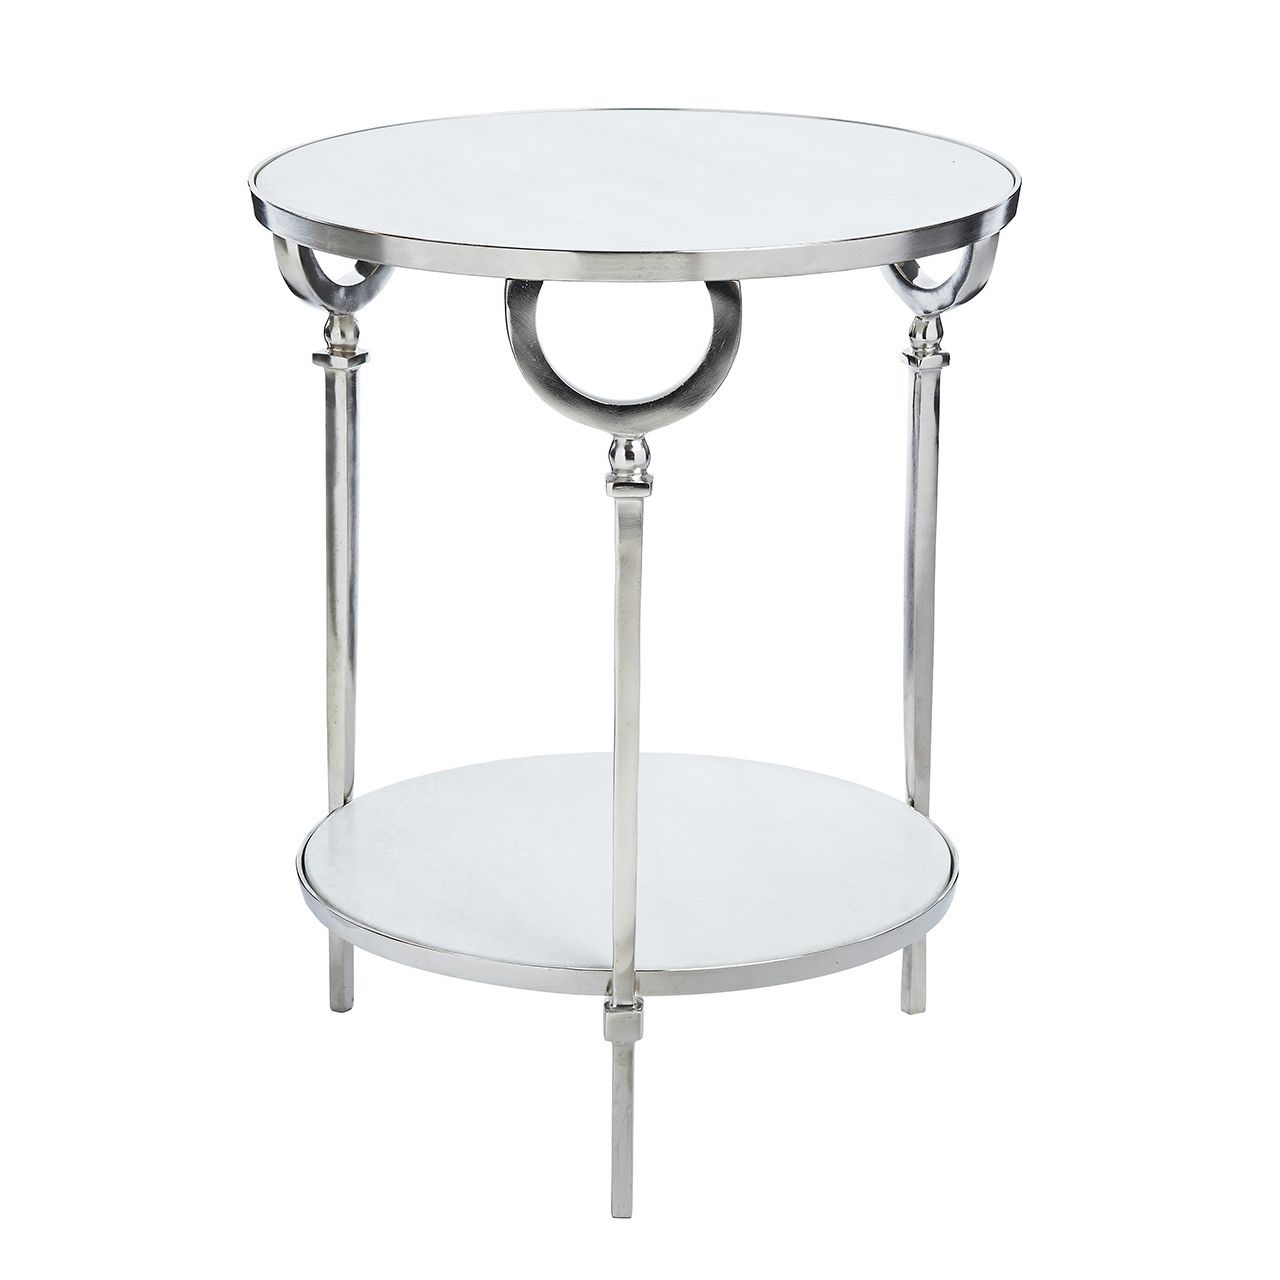 joyce accent table marble top bowring home accessories white shelf pier one wicker chair patio cushions cocktail tablecloth small folding end galvanized metal side high bamboo